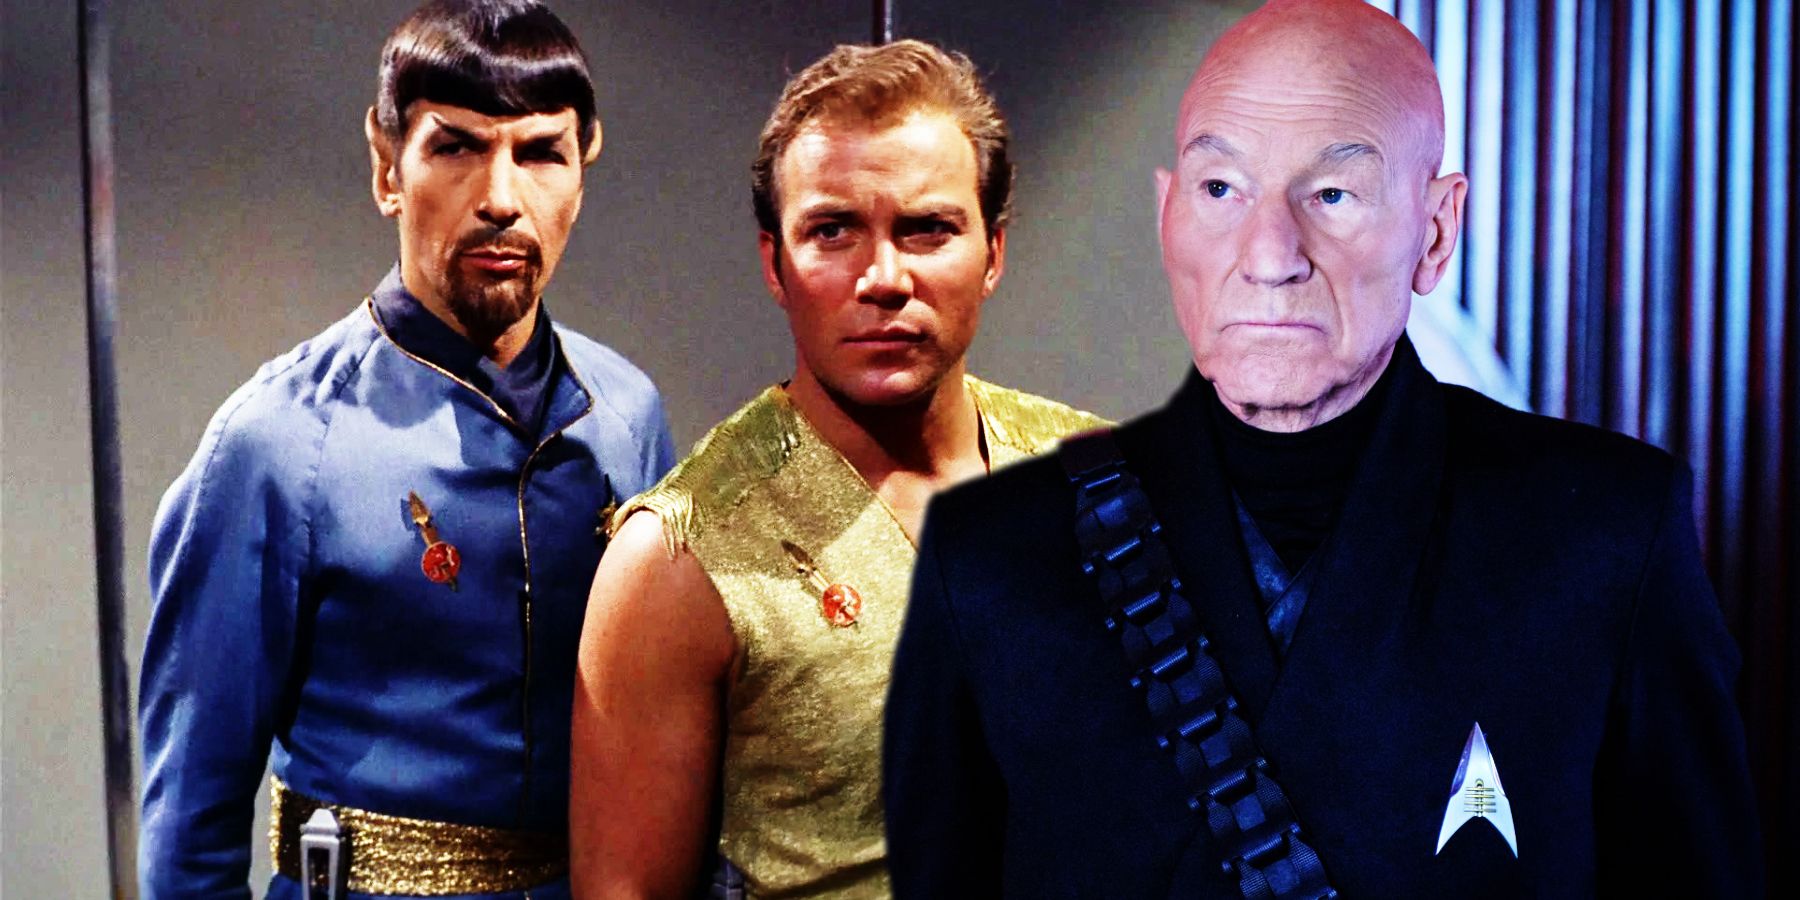 Mirror Spock and Kirk versus Confederation Jean-Luc Picard